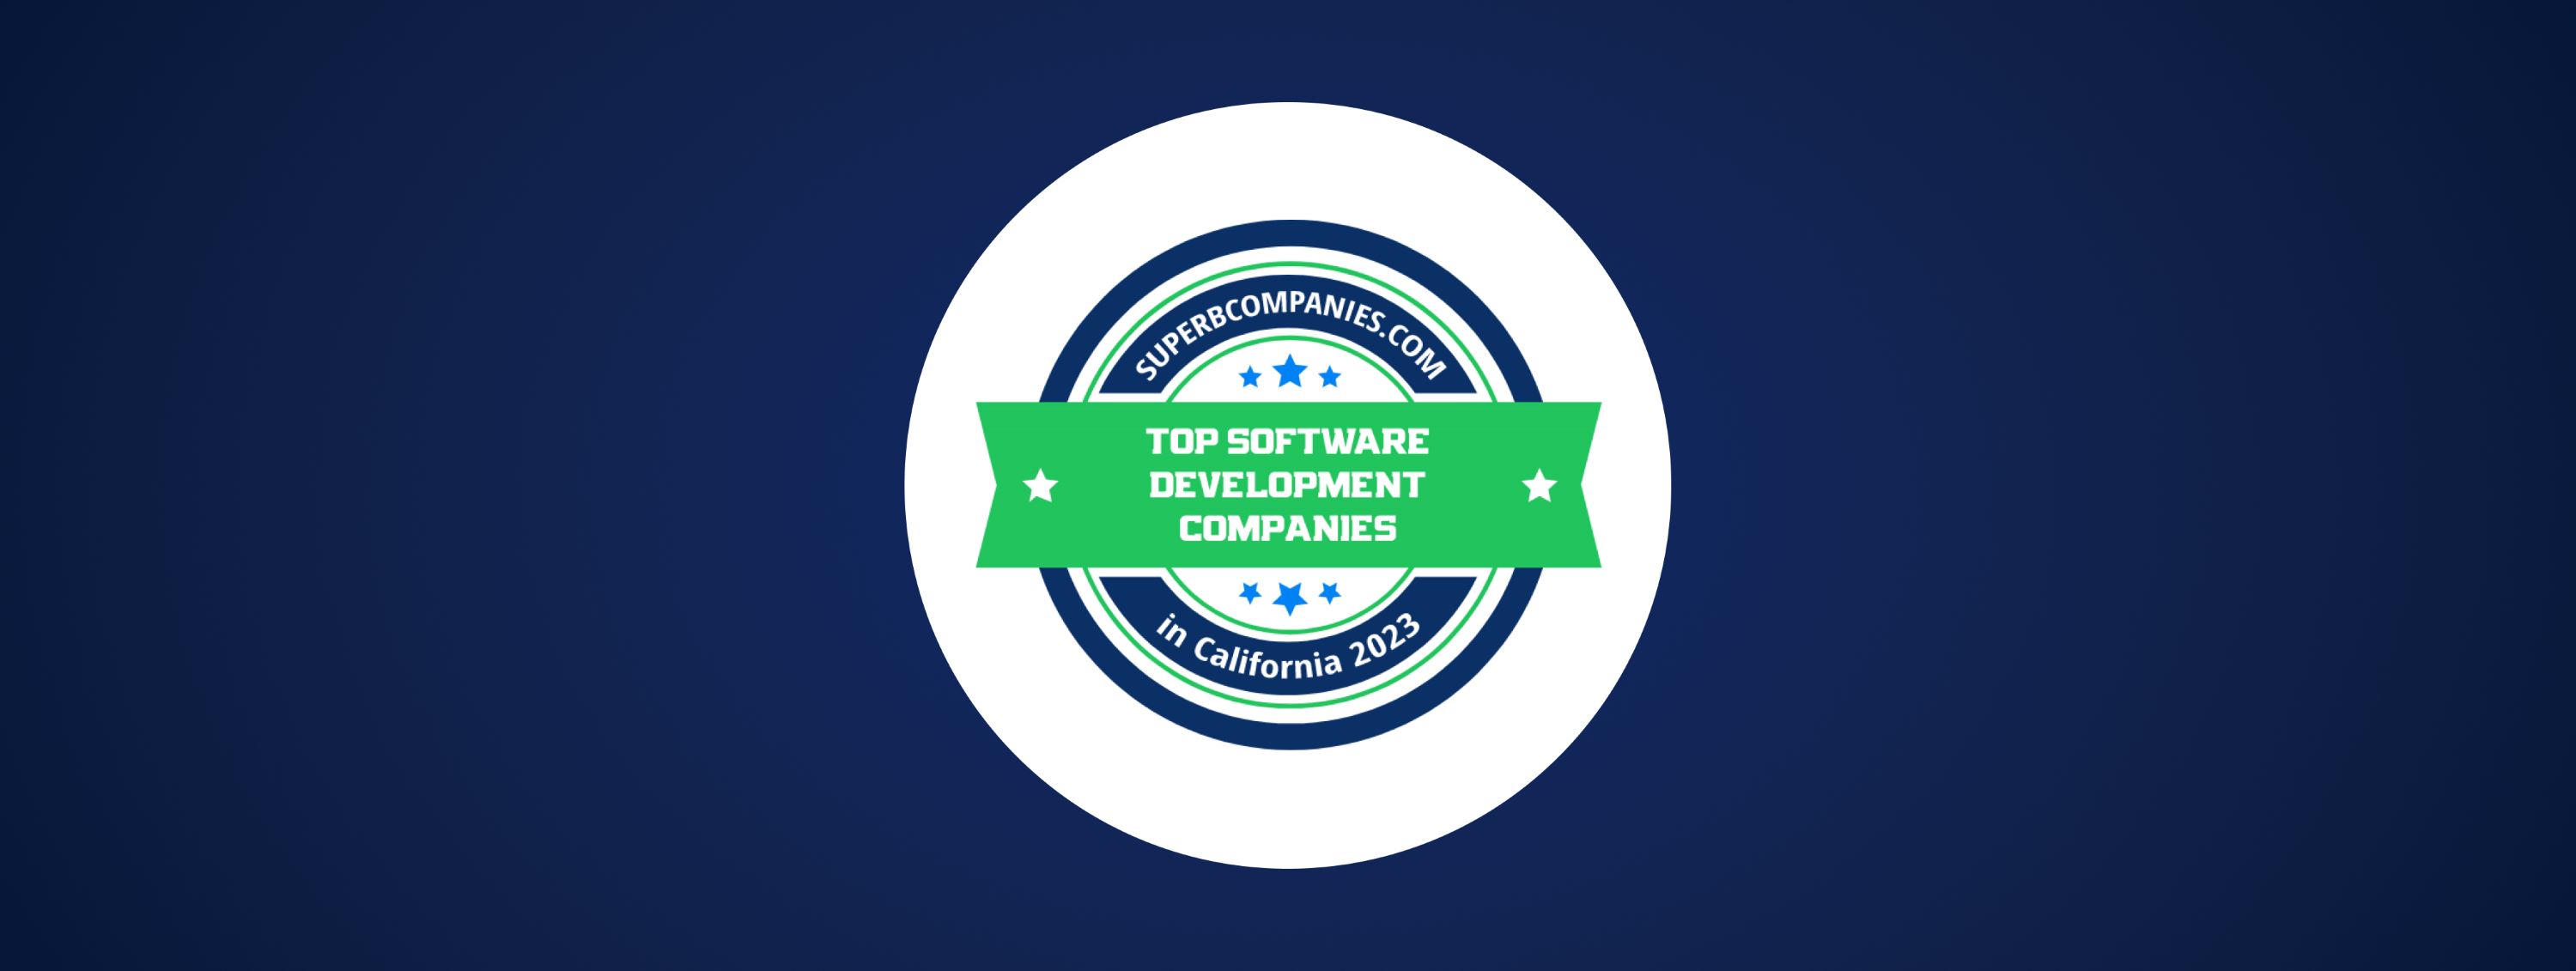 EffectiveSoft named one of the Top App Development Companies in California by Superbcompanies